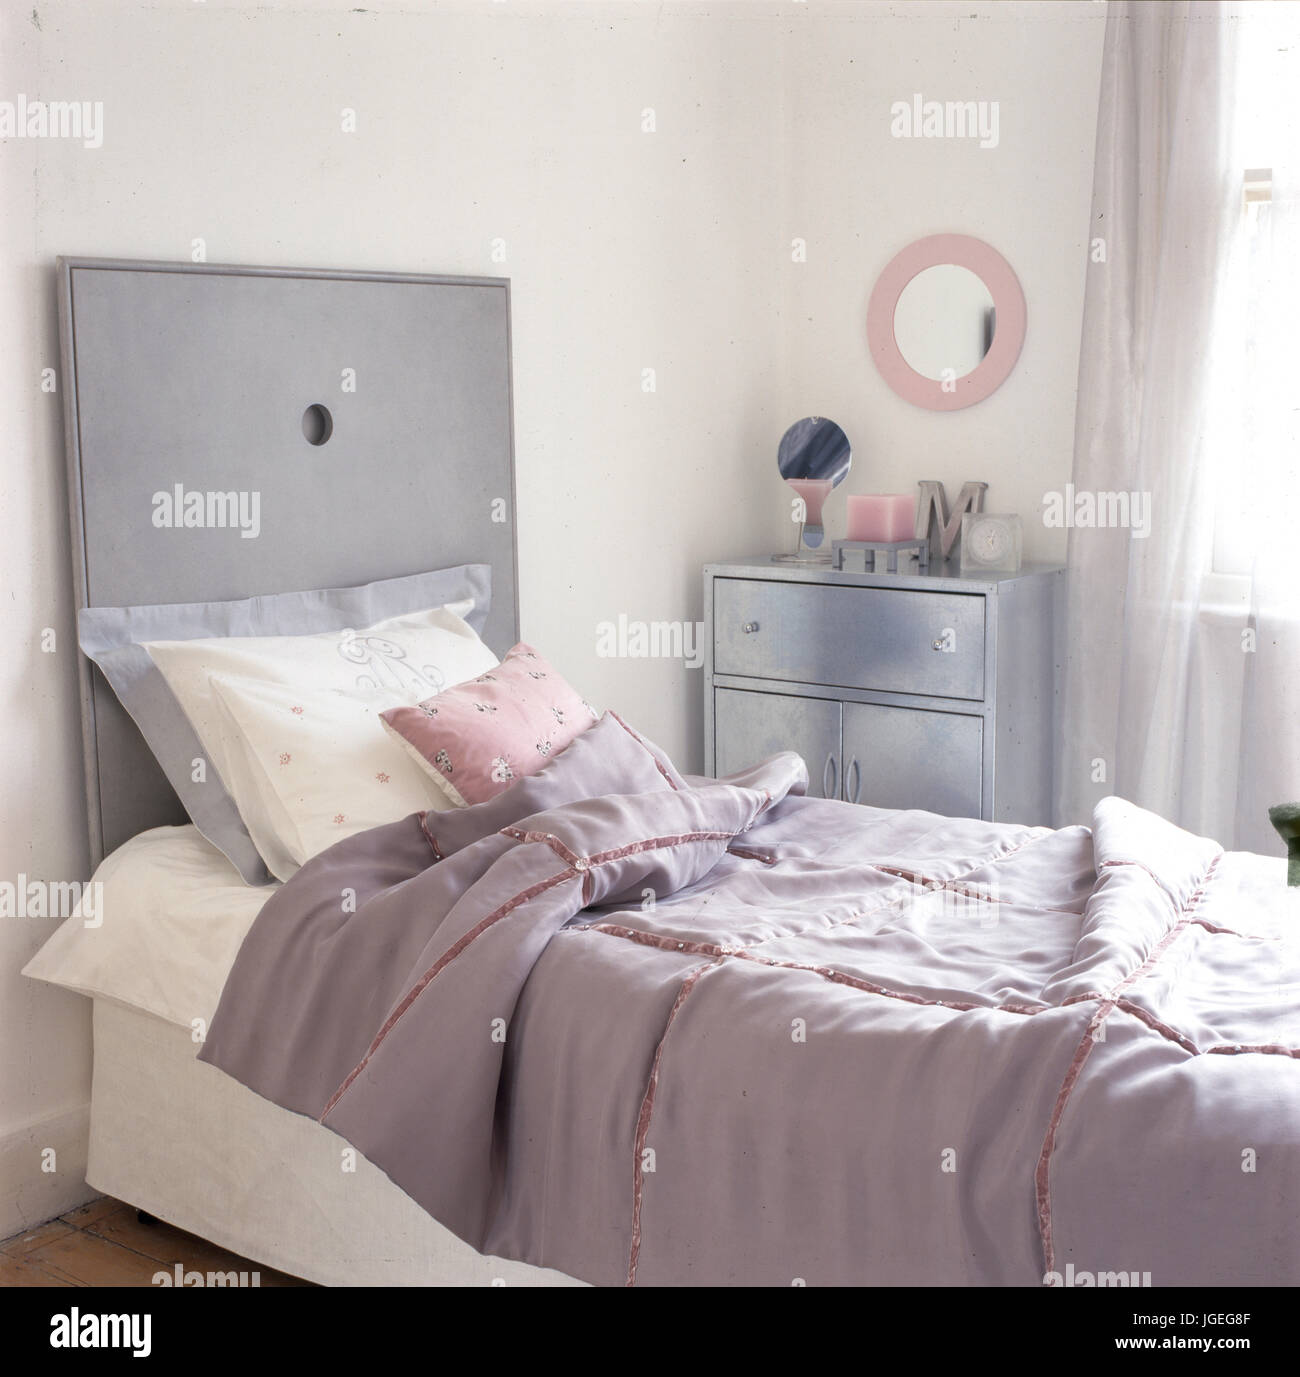 Single Bed In Feminine Room With Pink And Grey Colour Scheme